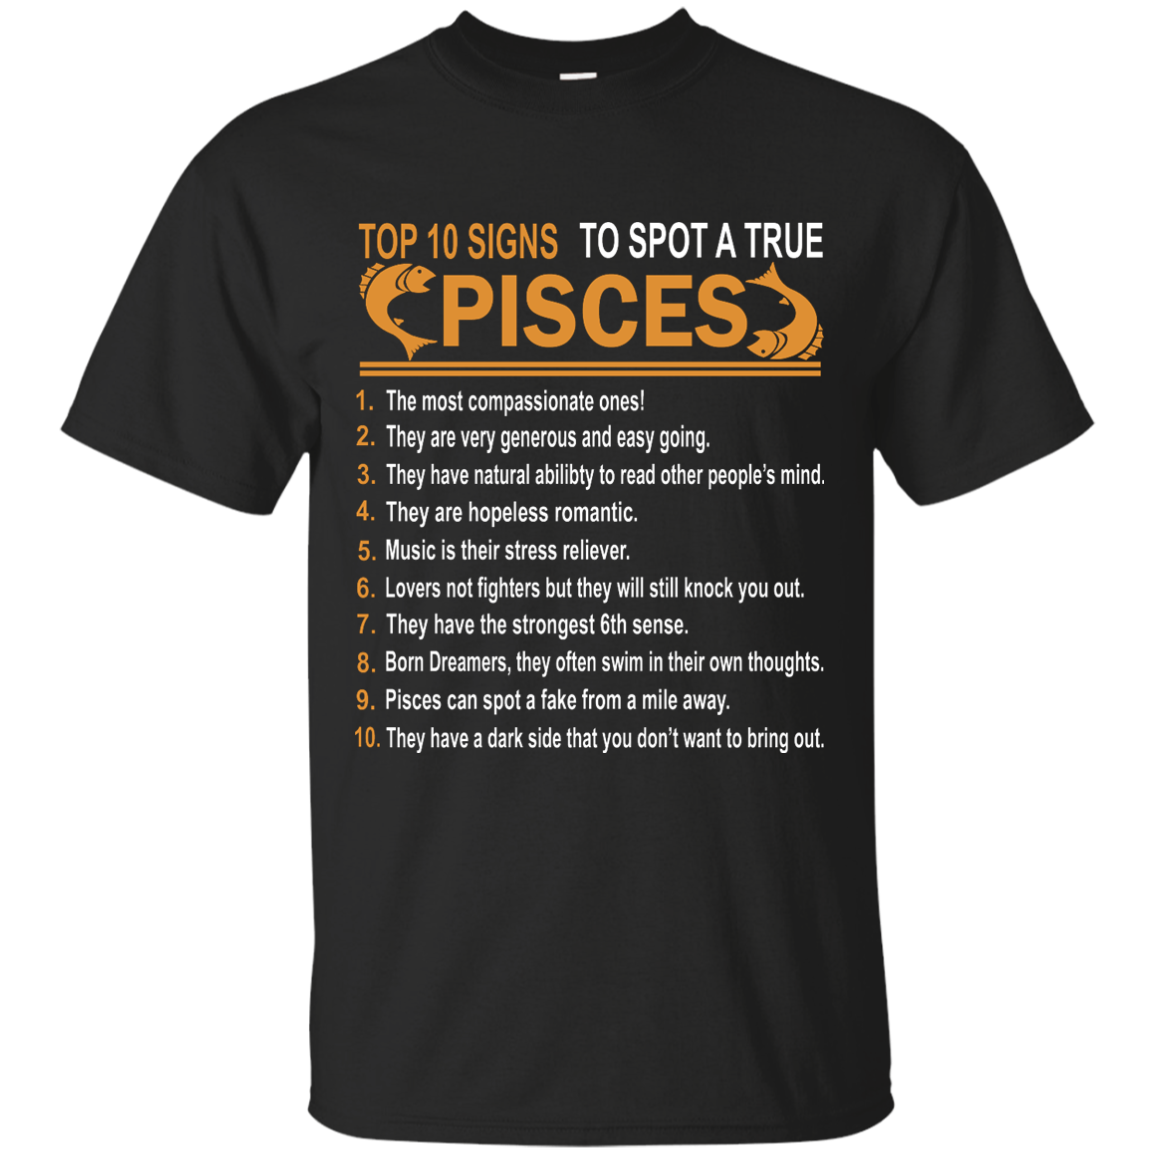 Top 10 Signs To Spot A True Pisces shirt, sweater, tank - iFrogTees